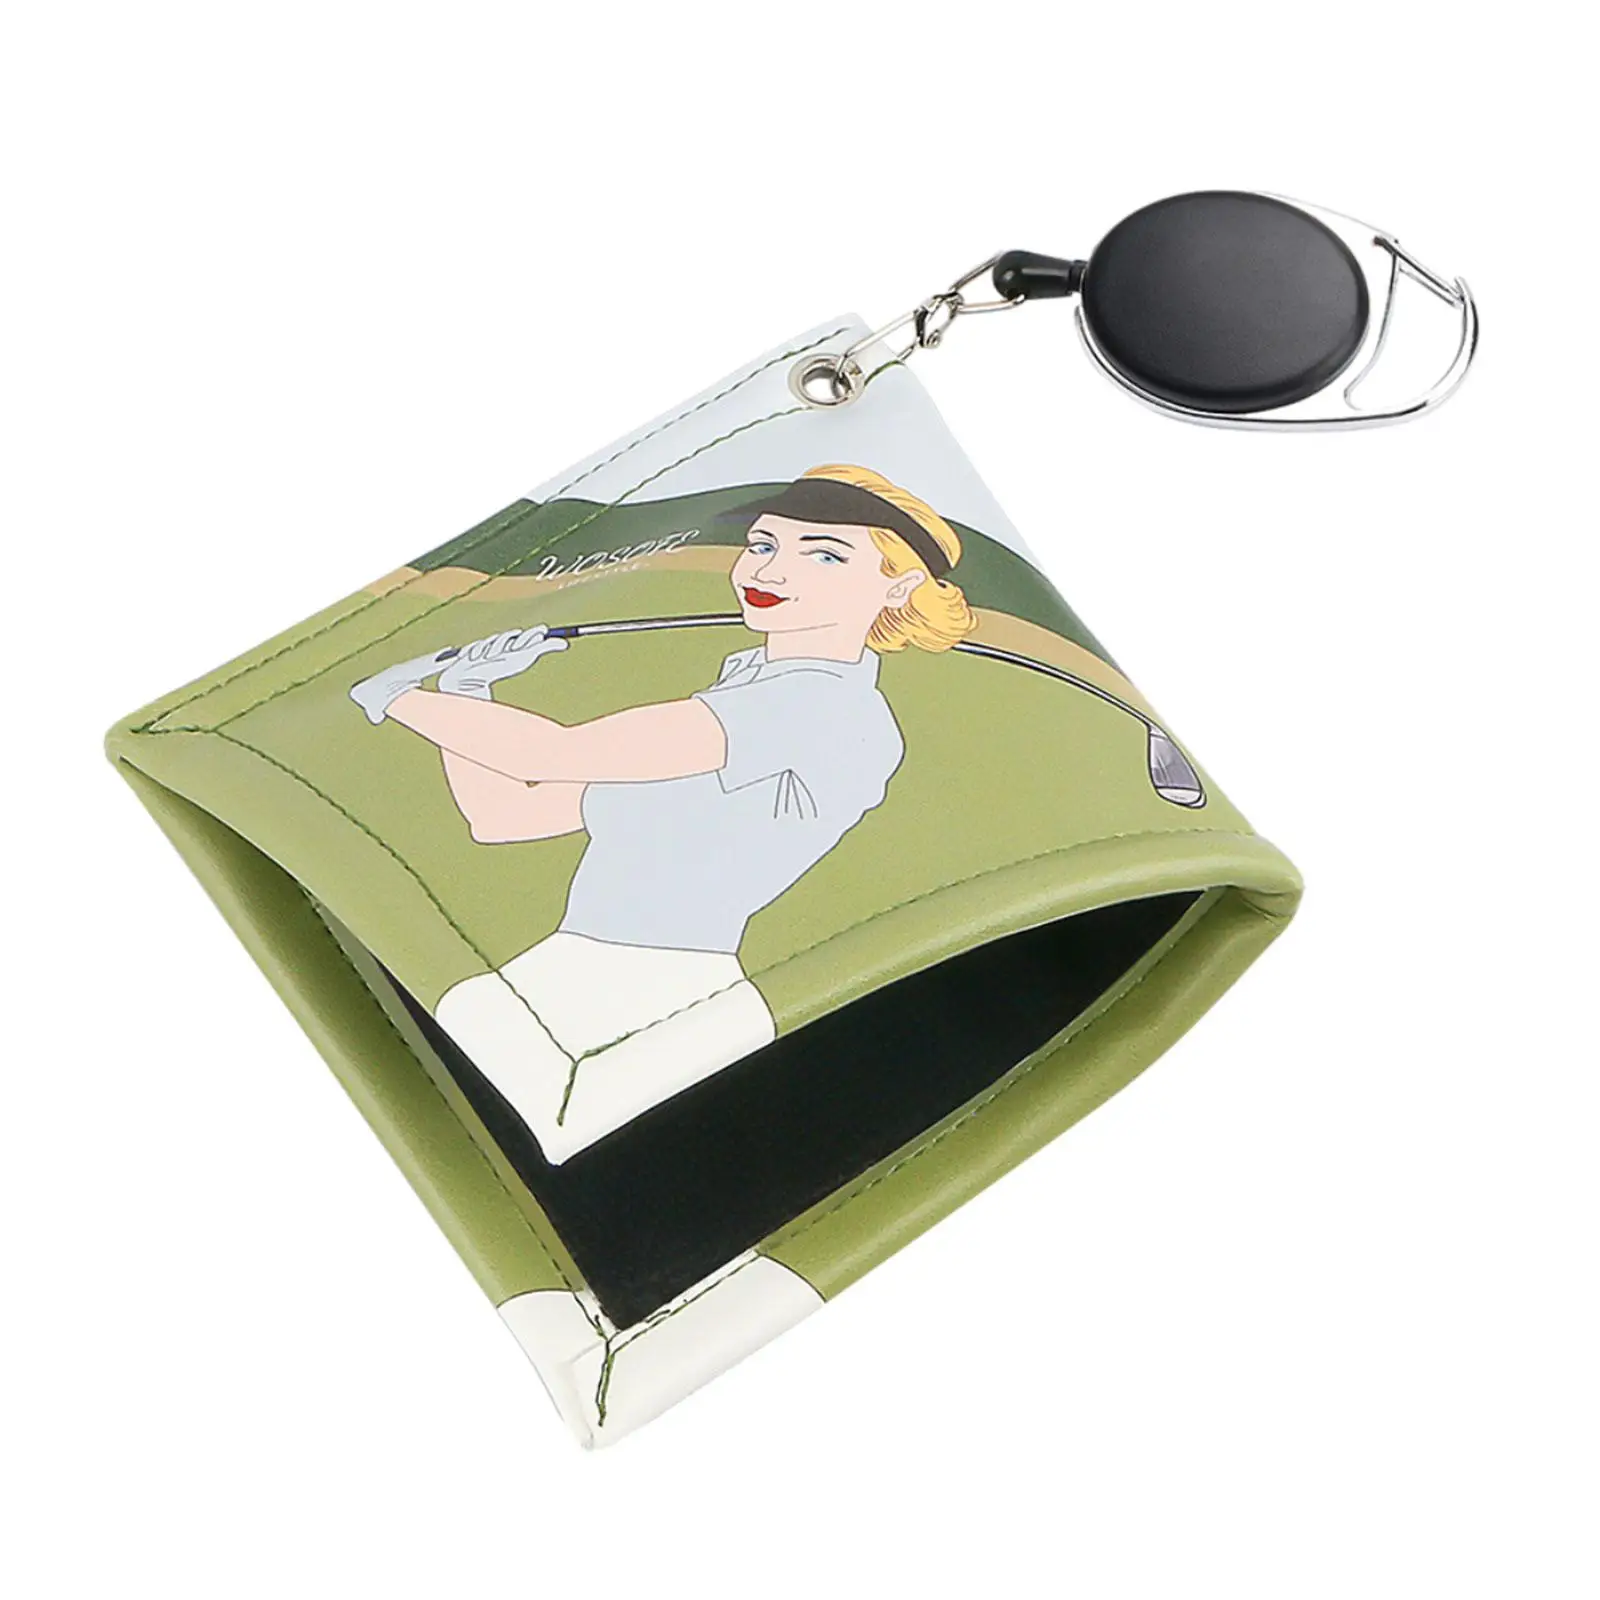 Golf Ball Towel Wiping Cloth W/ Retractable Keychain Strong Absorbent Toweling Golf Club Head Cleaner Golf Ball Cleaner Pocket